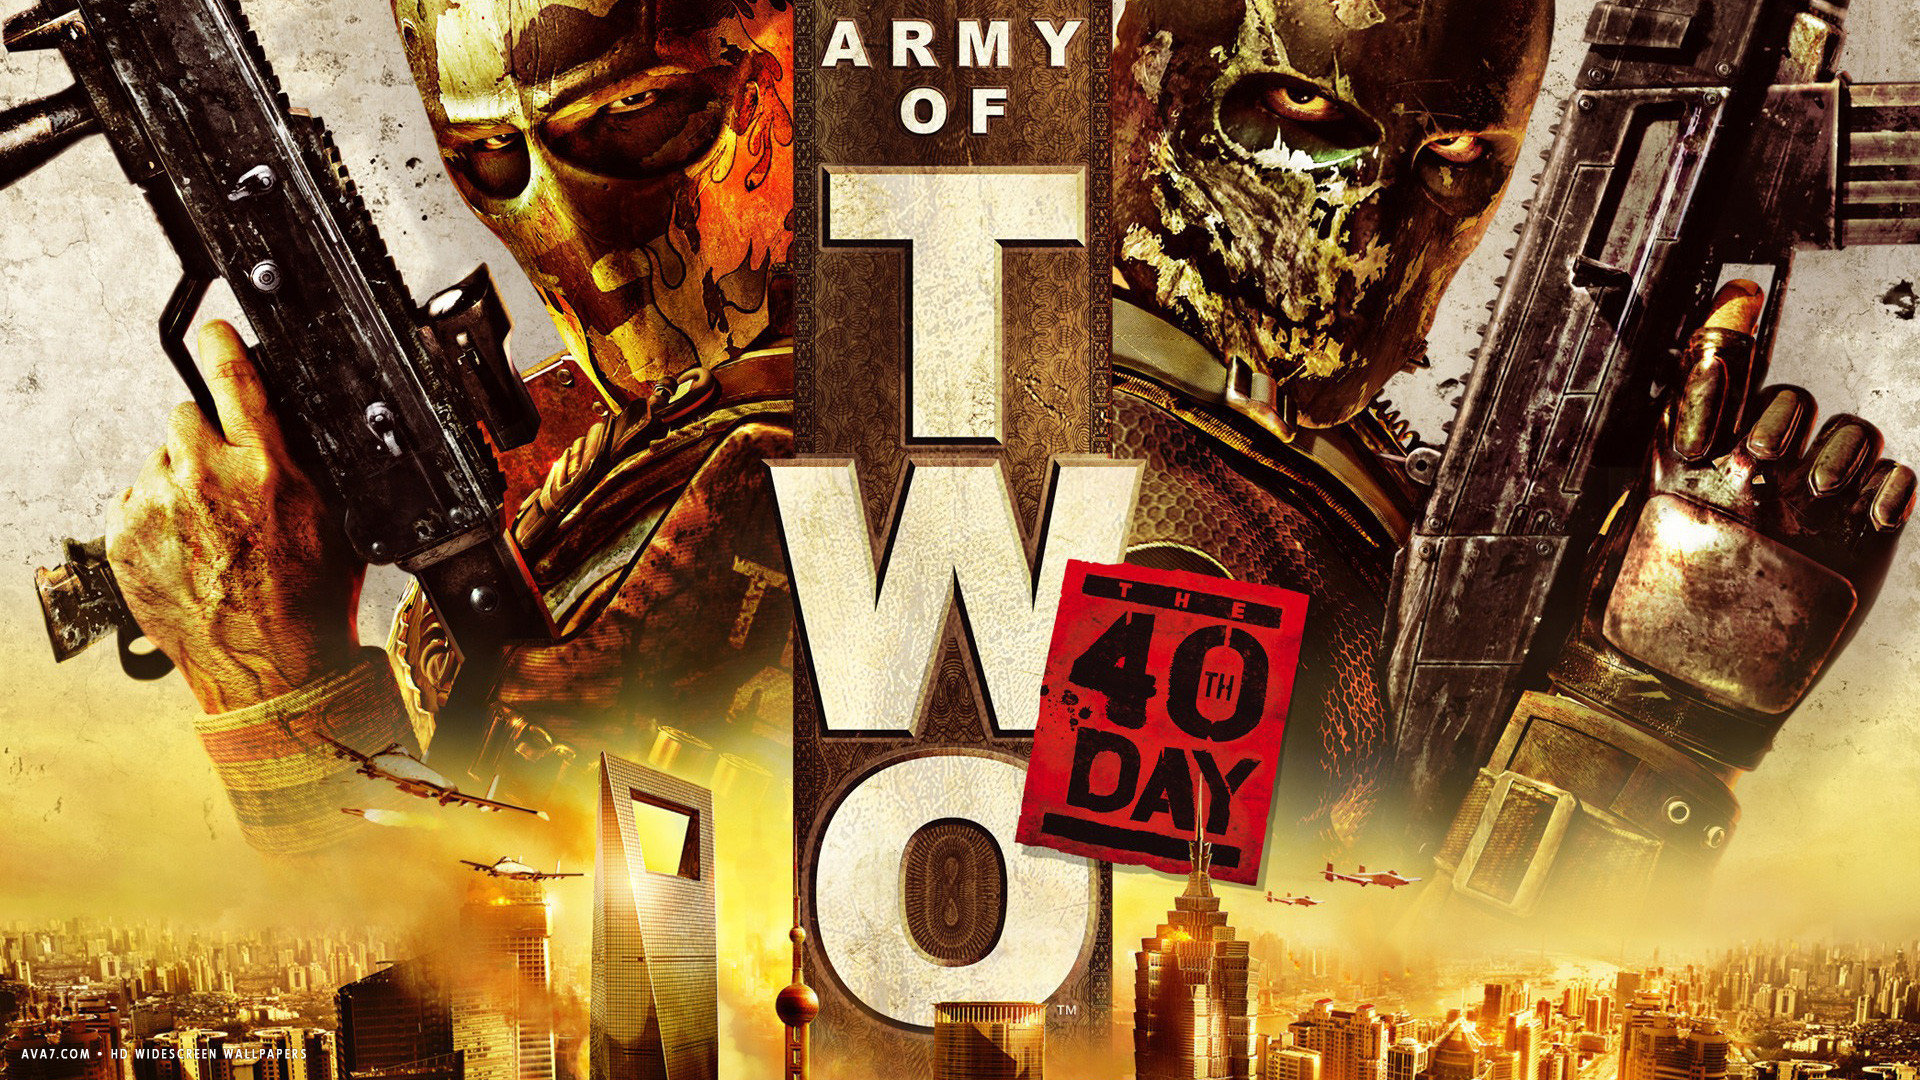 army of two the 40th day third person shooter hd widescreen wallpaper